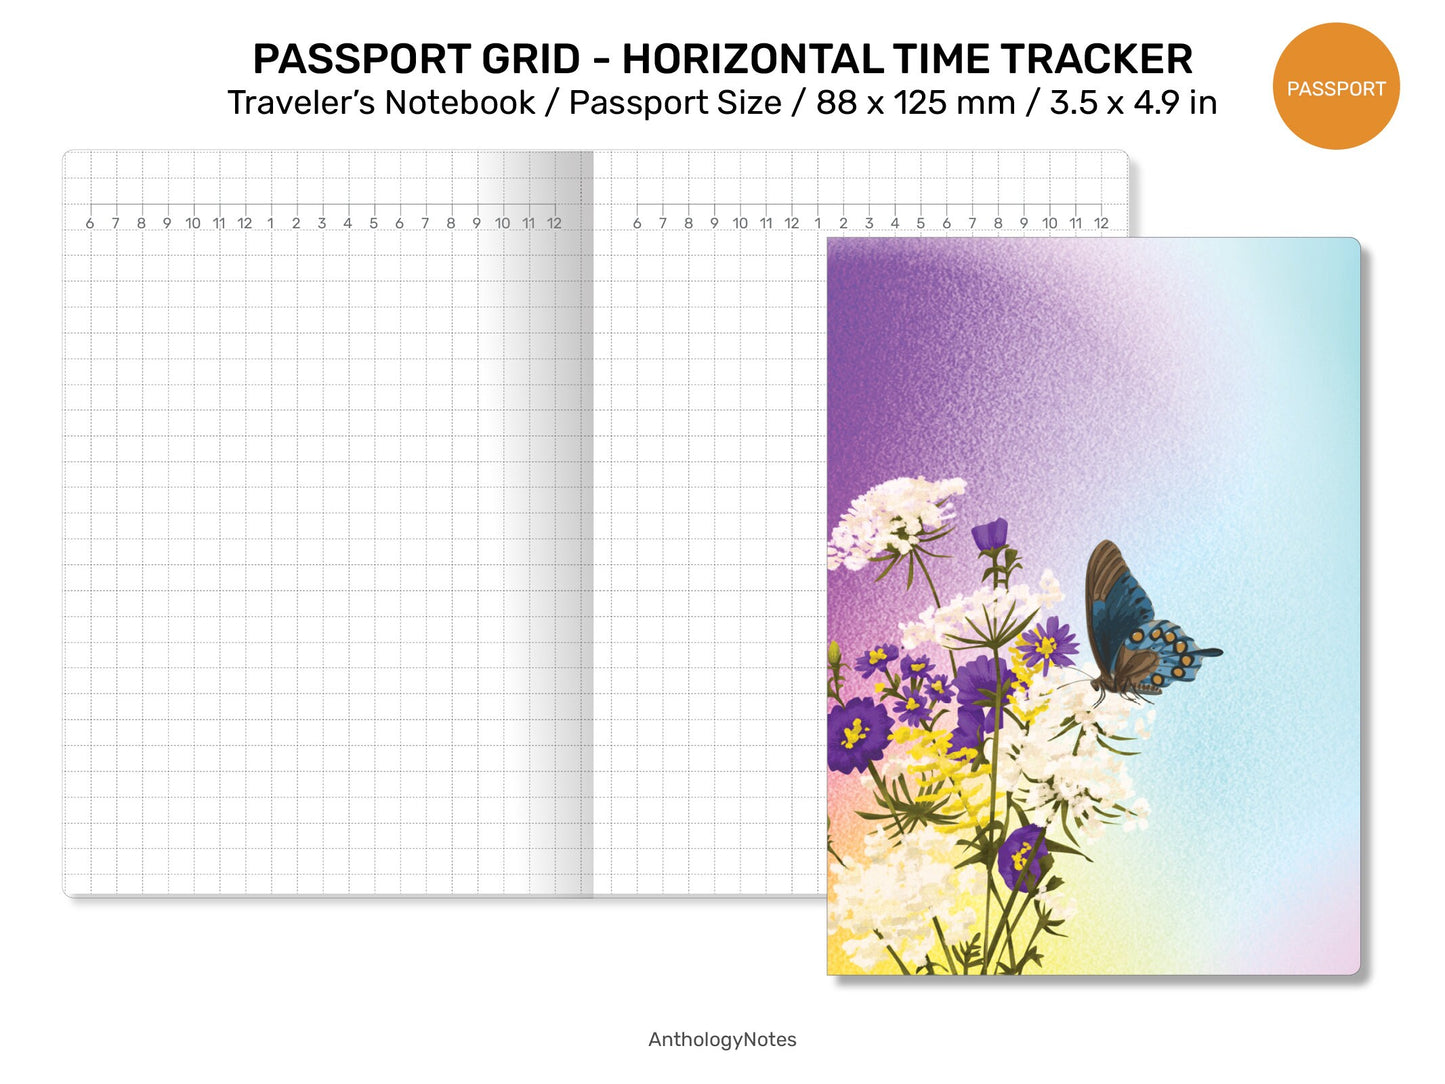 PASSPORT Daily View GRID - Printable Traveler's Notebook Insert (Do1P) Day on 1 Page - Minimalist PP22-003